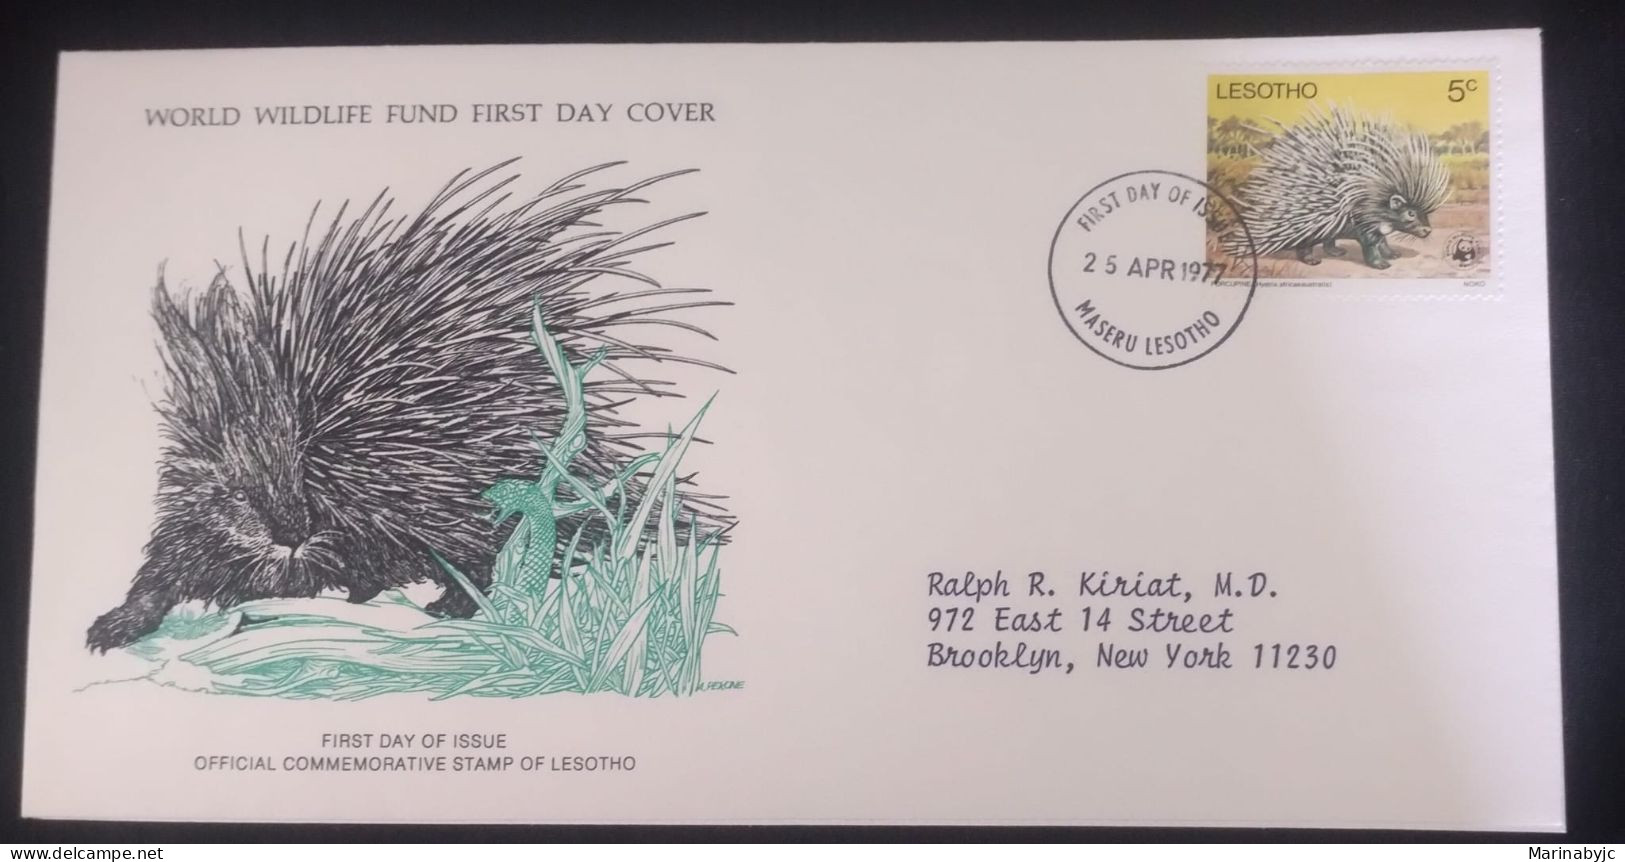 EL)1977 LESOTHO, WORLD WILDLIFE FUND, WWF, SOUTH AFRICAN PORCUPINE, CIRCULATED TO NEW YORK - USA, FDC - Lesotho (1966-...)